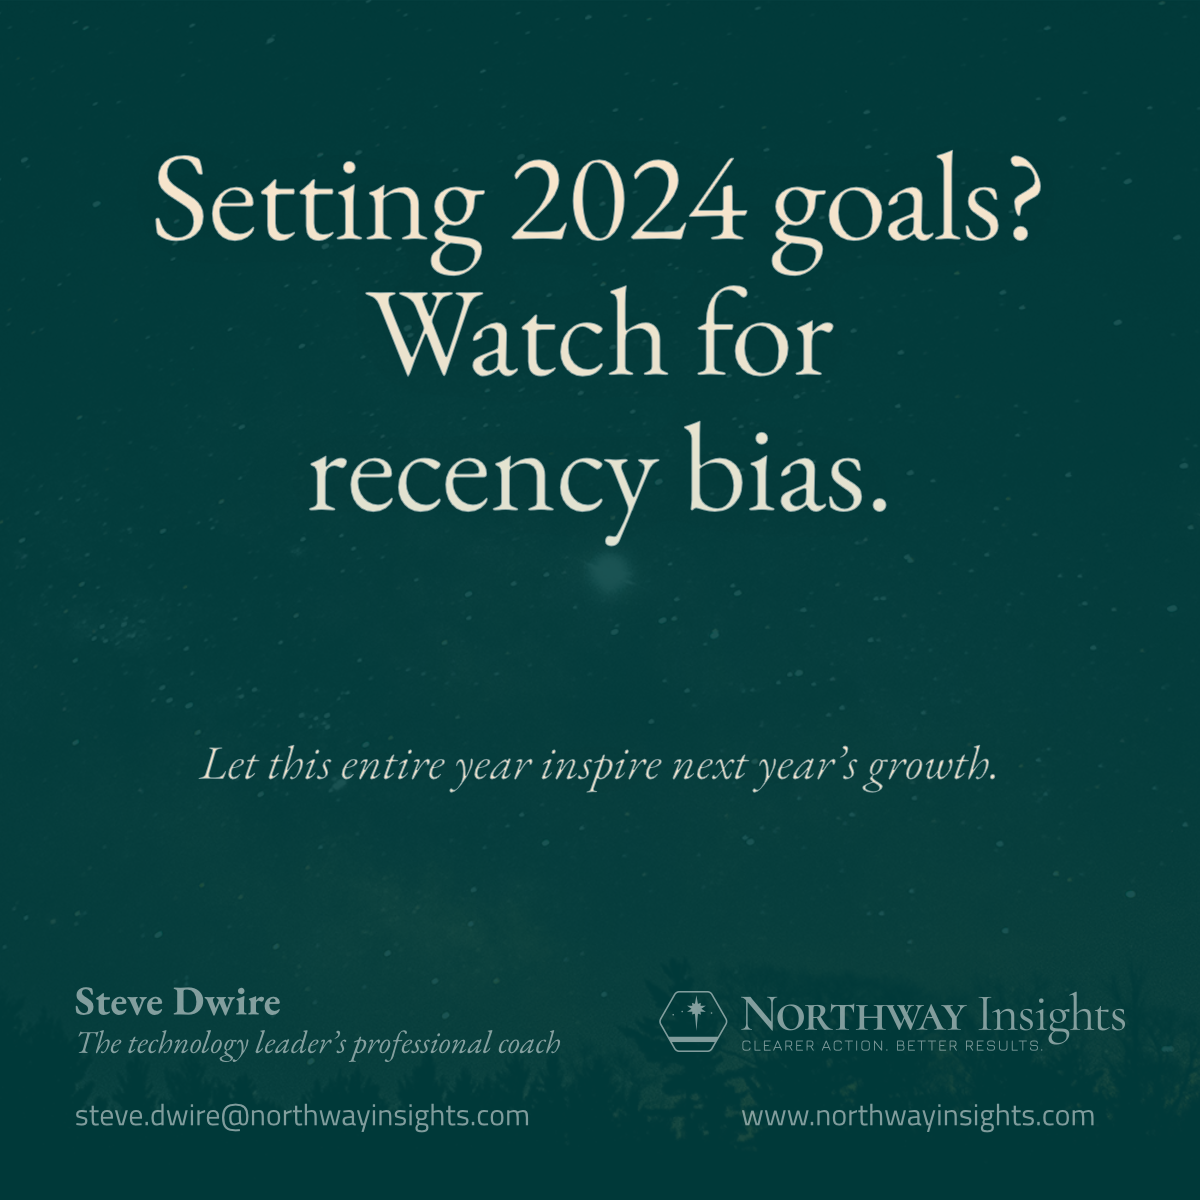 Setting 2024 goals? Watch for recency bias. (Let this entire year inspire next year's growth.)